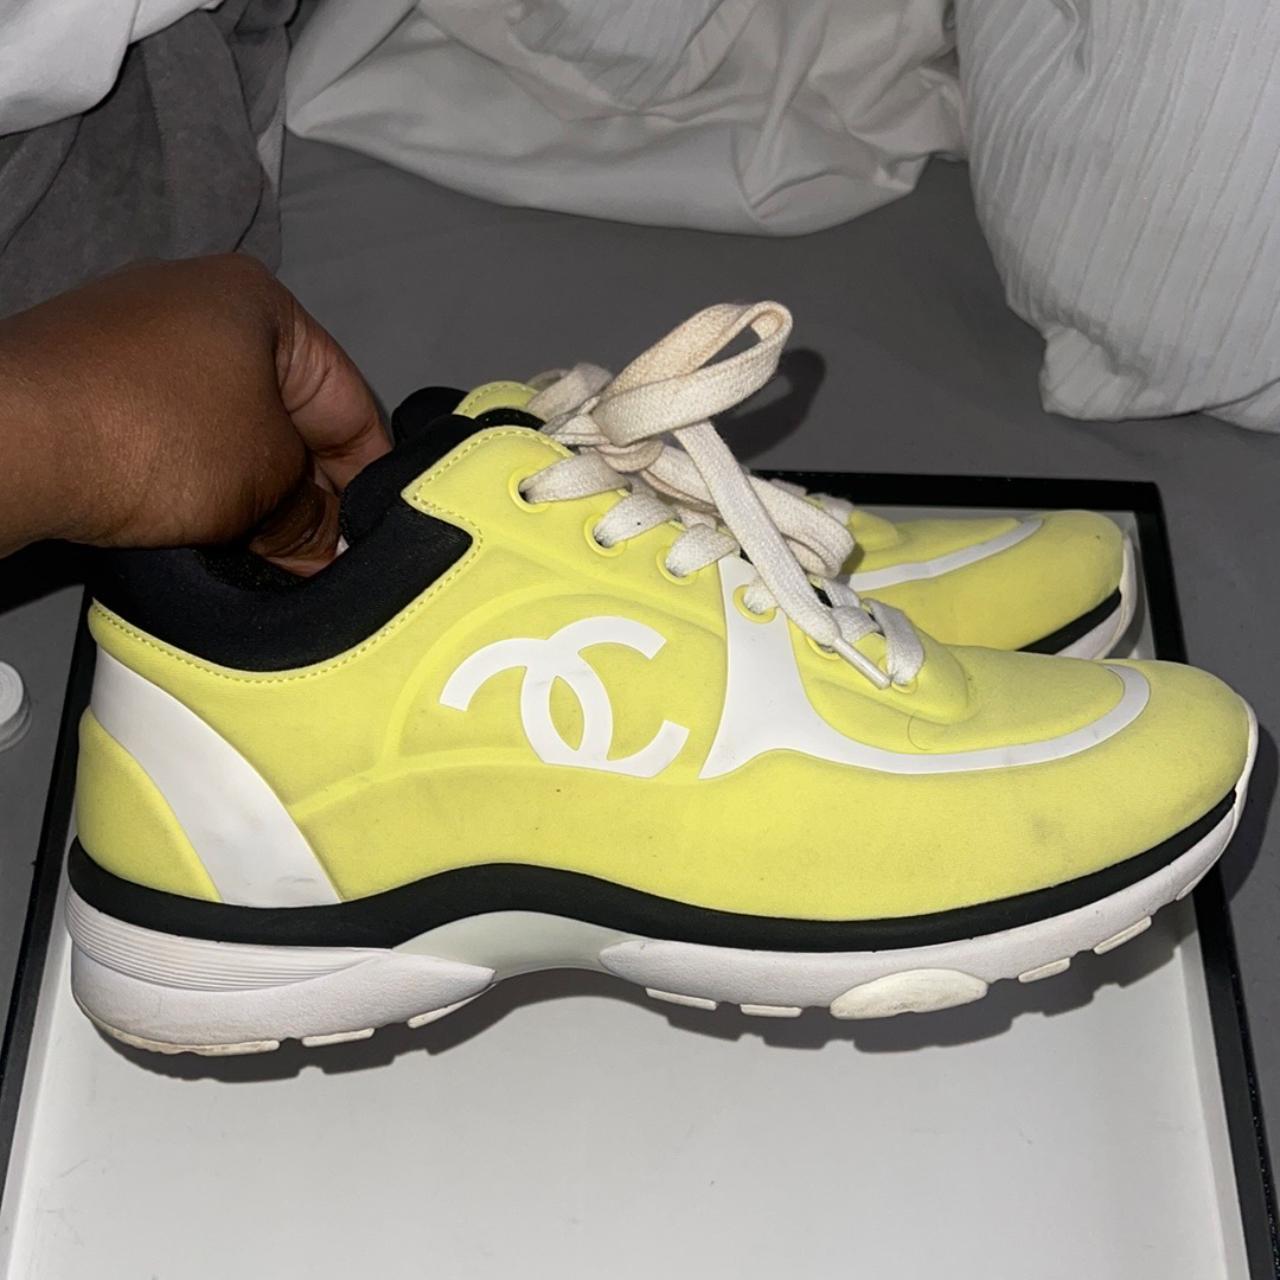 Authentic Chanel sneakers -